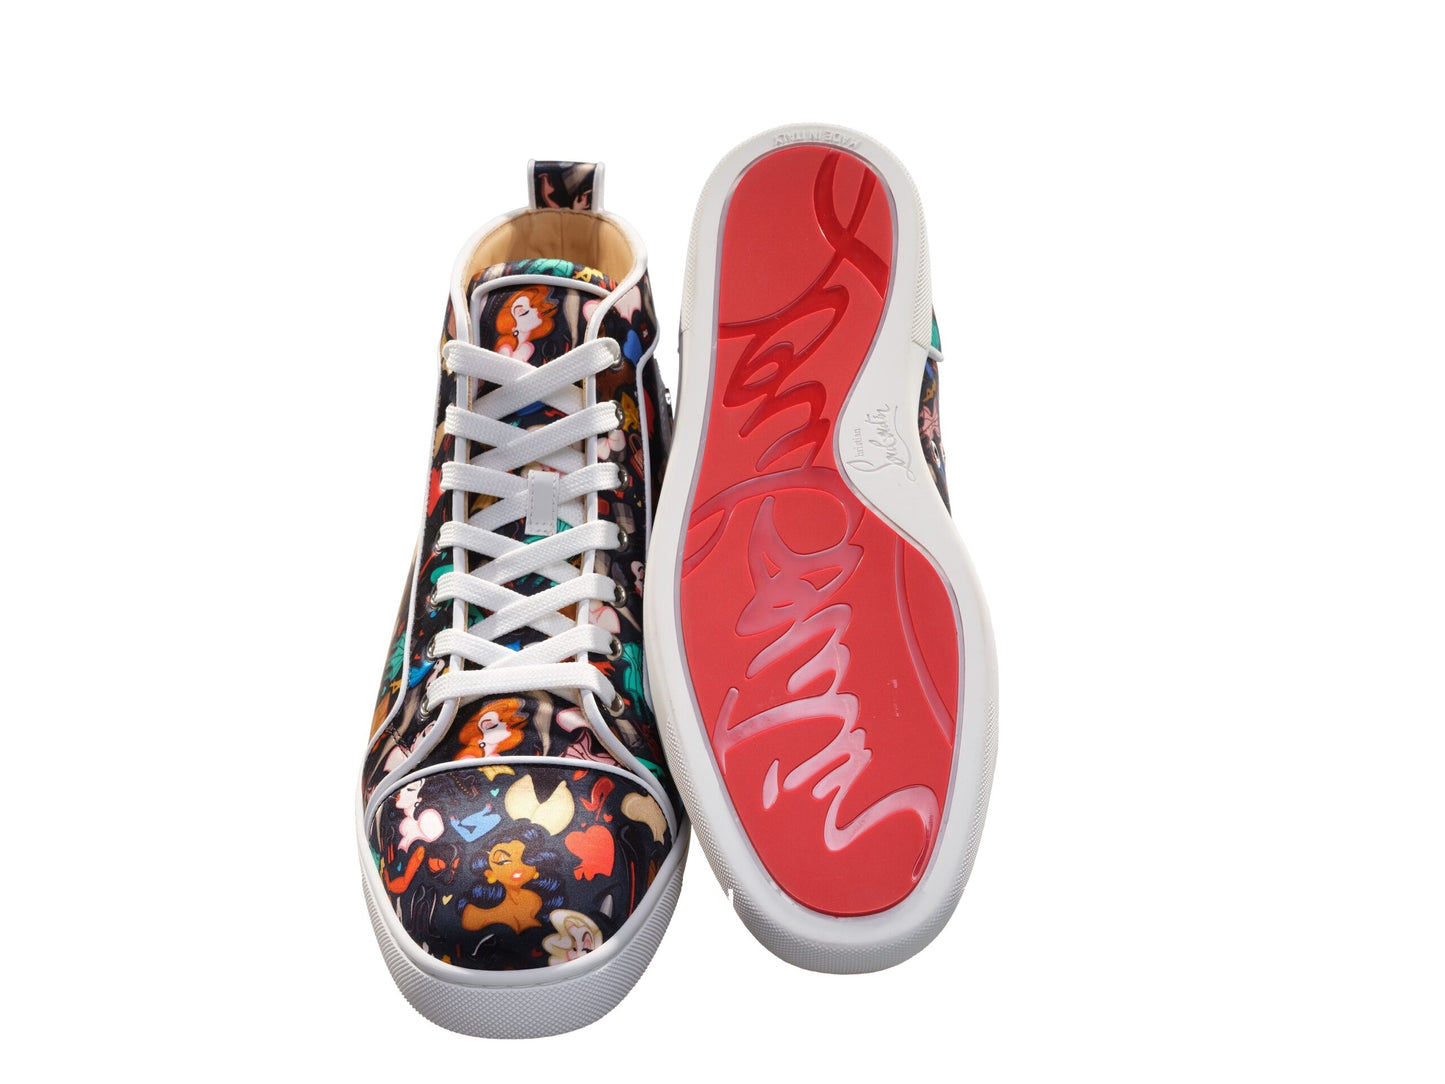 Louis Orlato Flat Crepe Satin Multicolour Limited edition Dr Bored Print High Top Sneakers